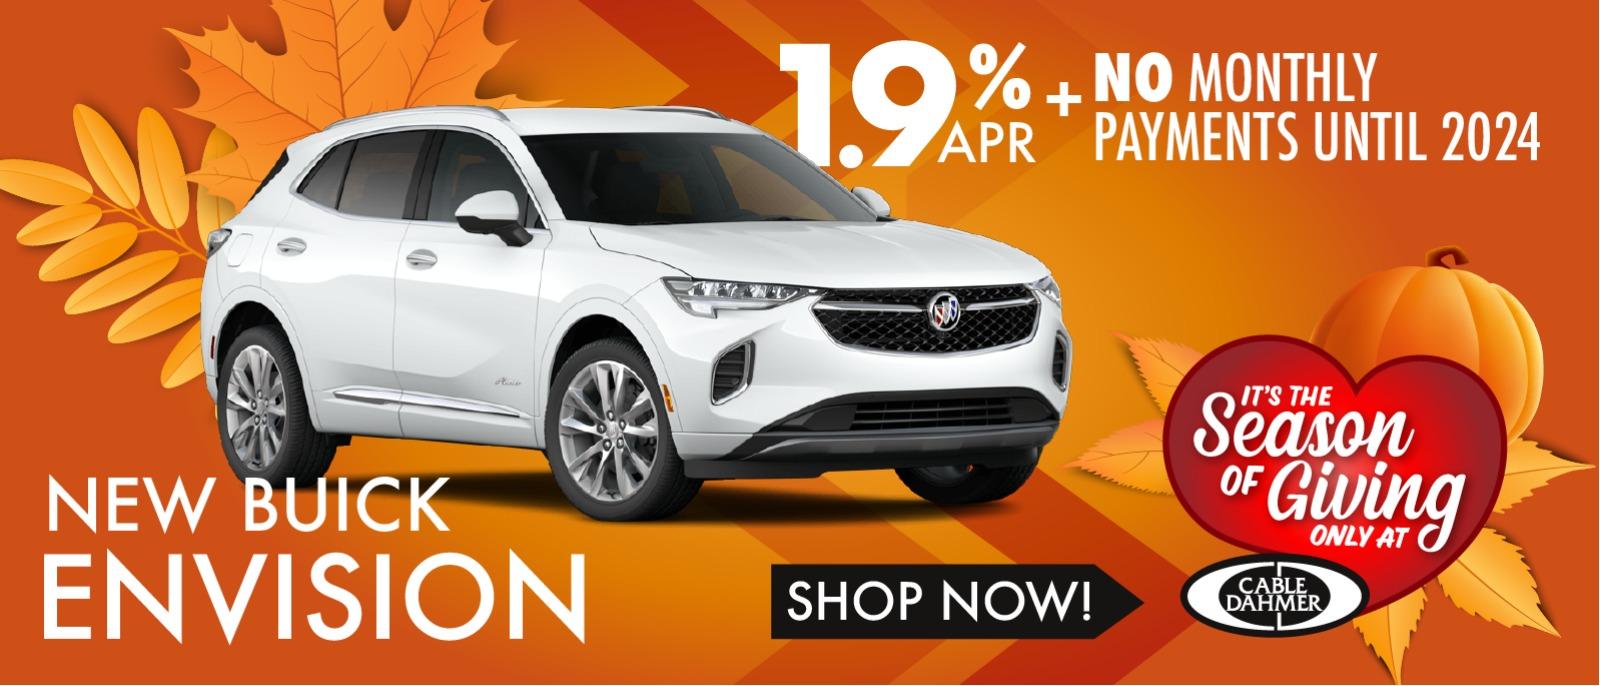 Buick Envision at 1.9% APR and no monthly payments unitl 2024